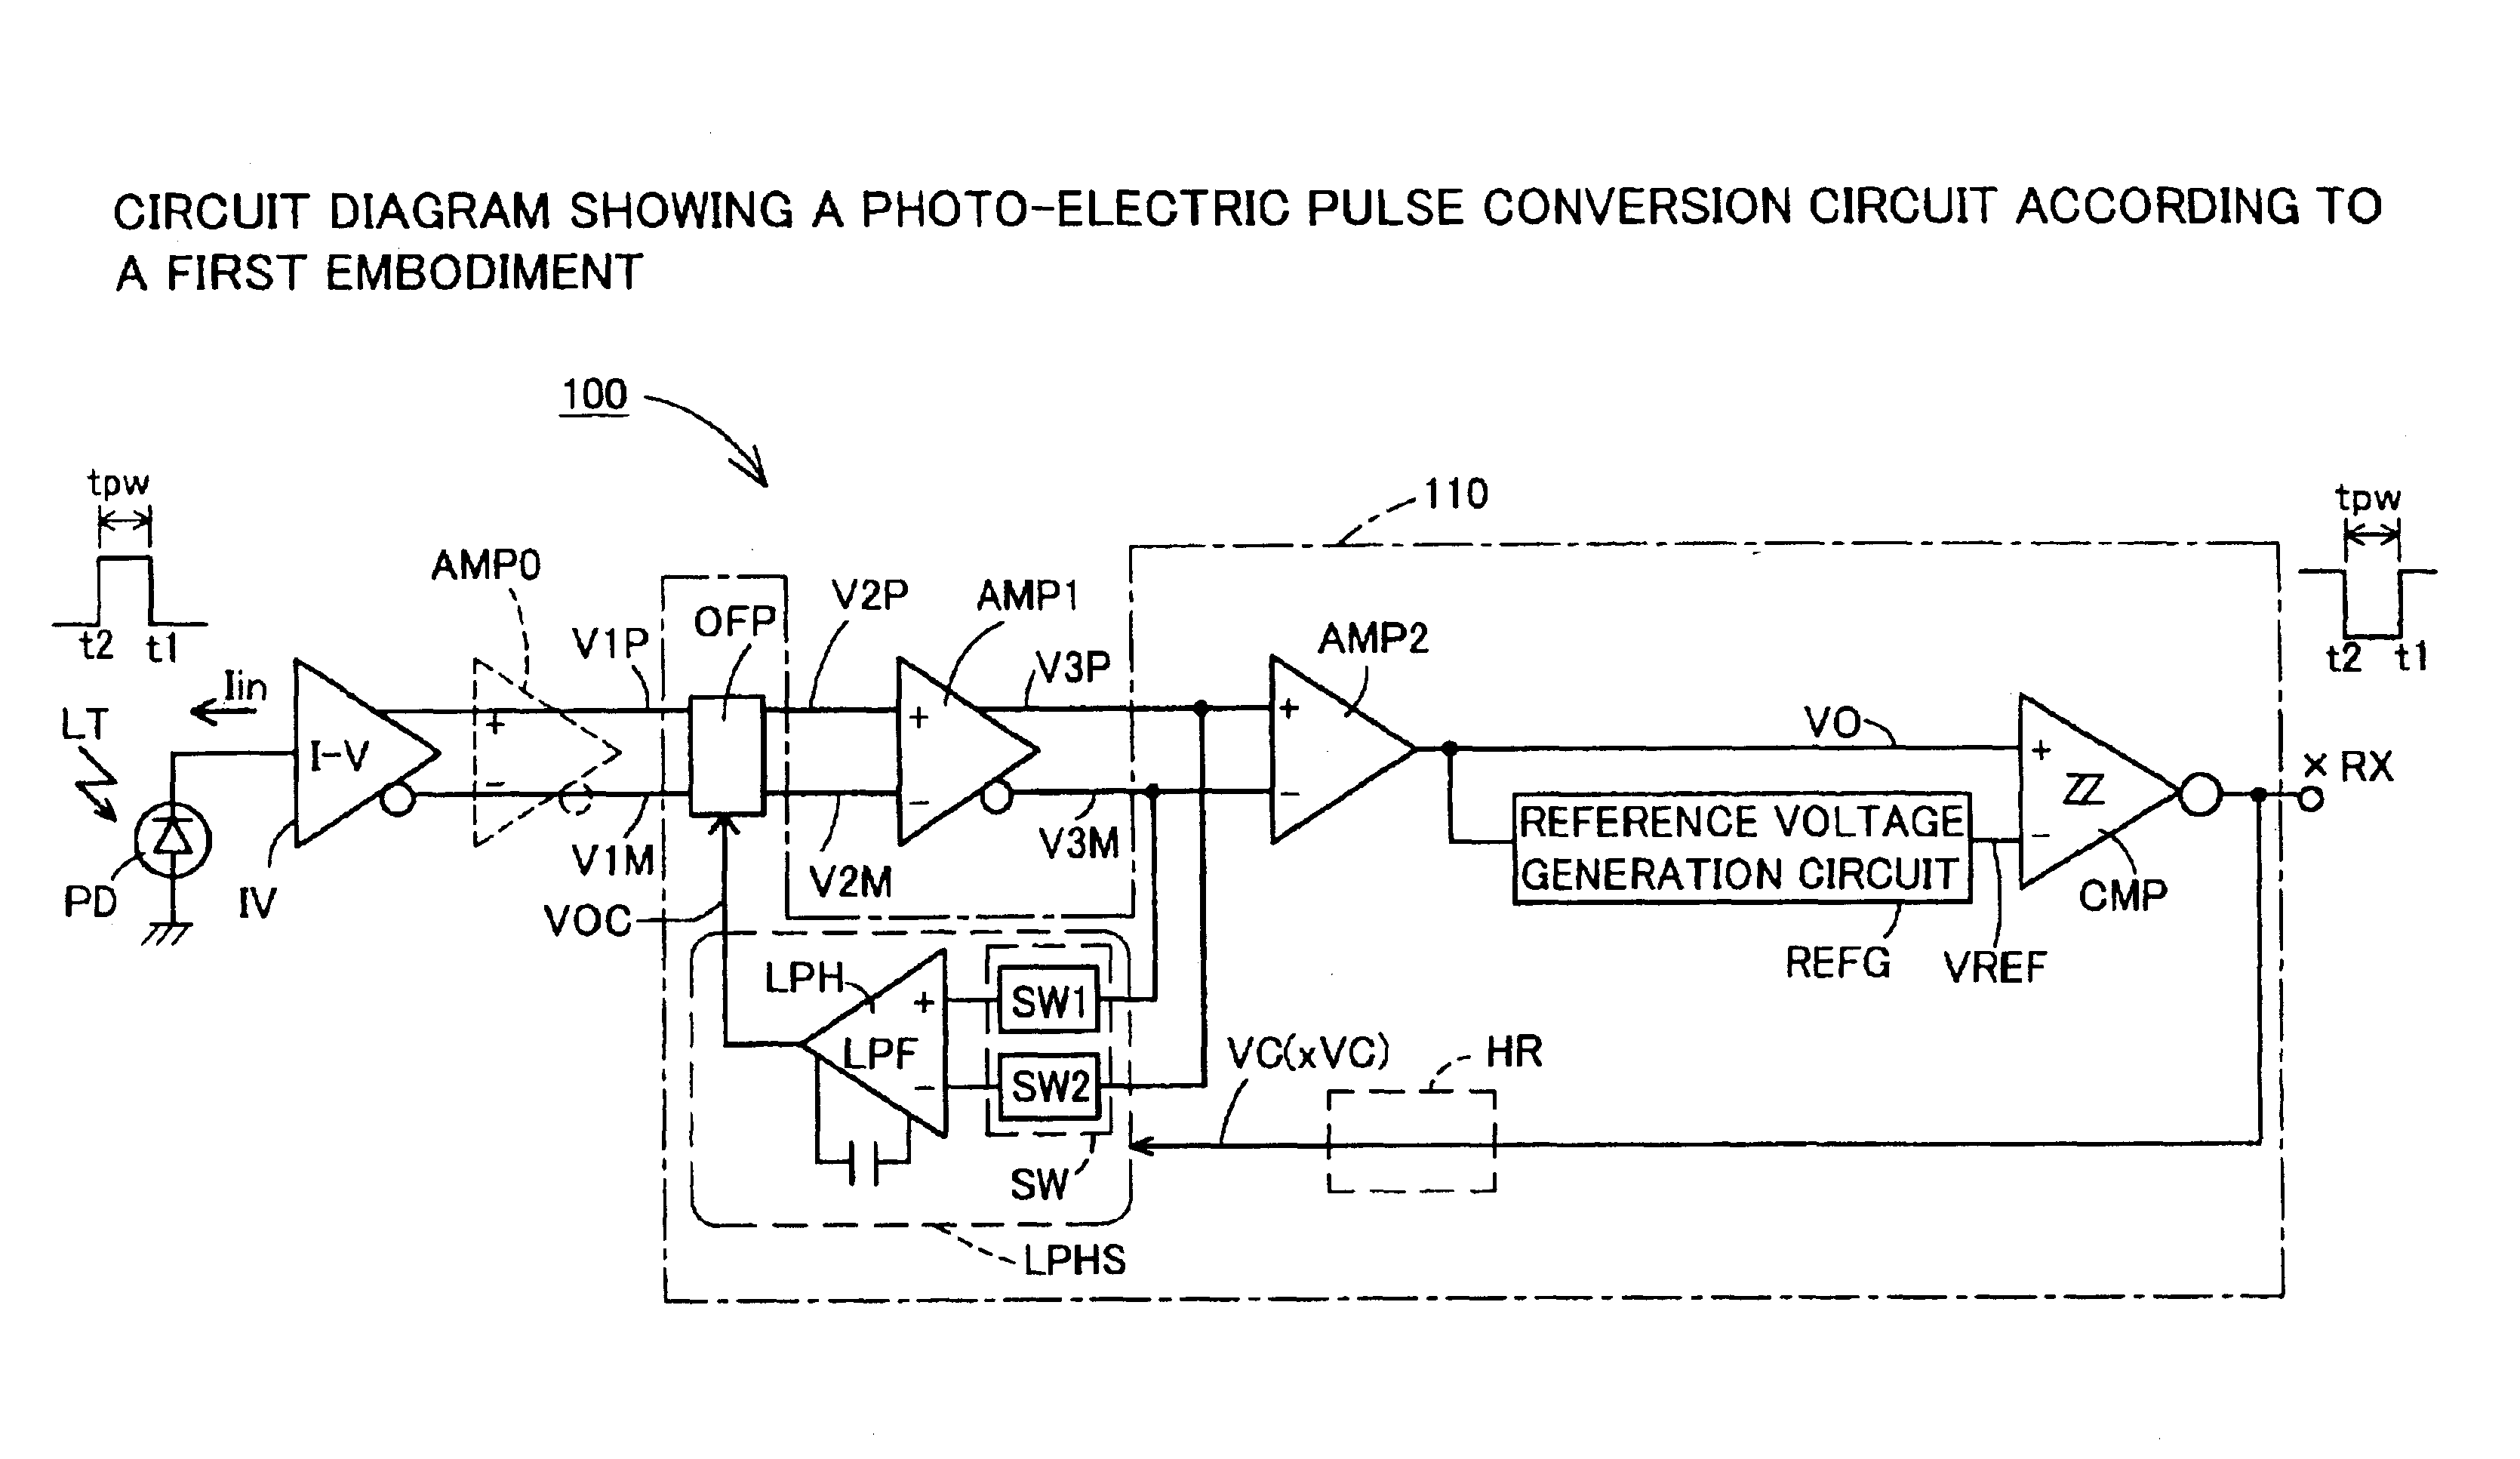 DC offset cancellation circuit, differential amplification circuit with DC offset cancellation circuit, photo-electric pulse conversion circuit, pulse shaping circuit, and pulse generation circuit